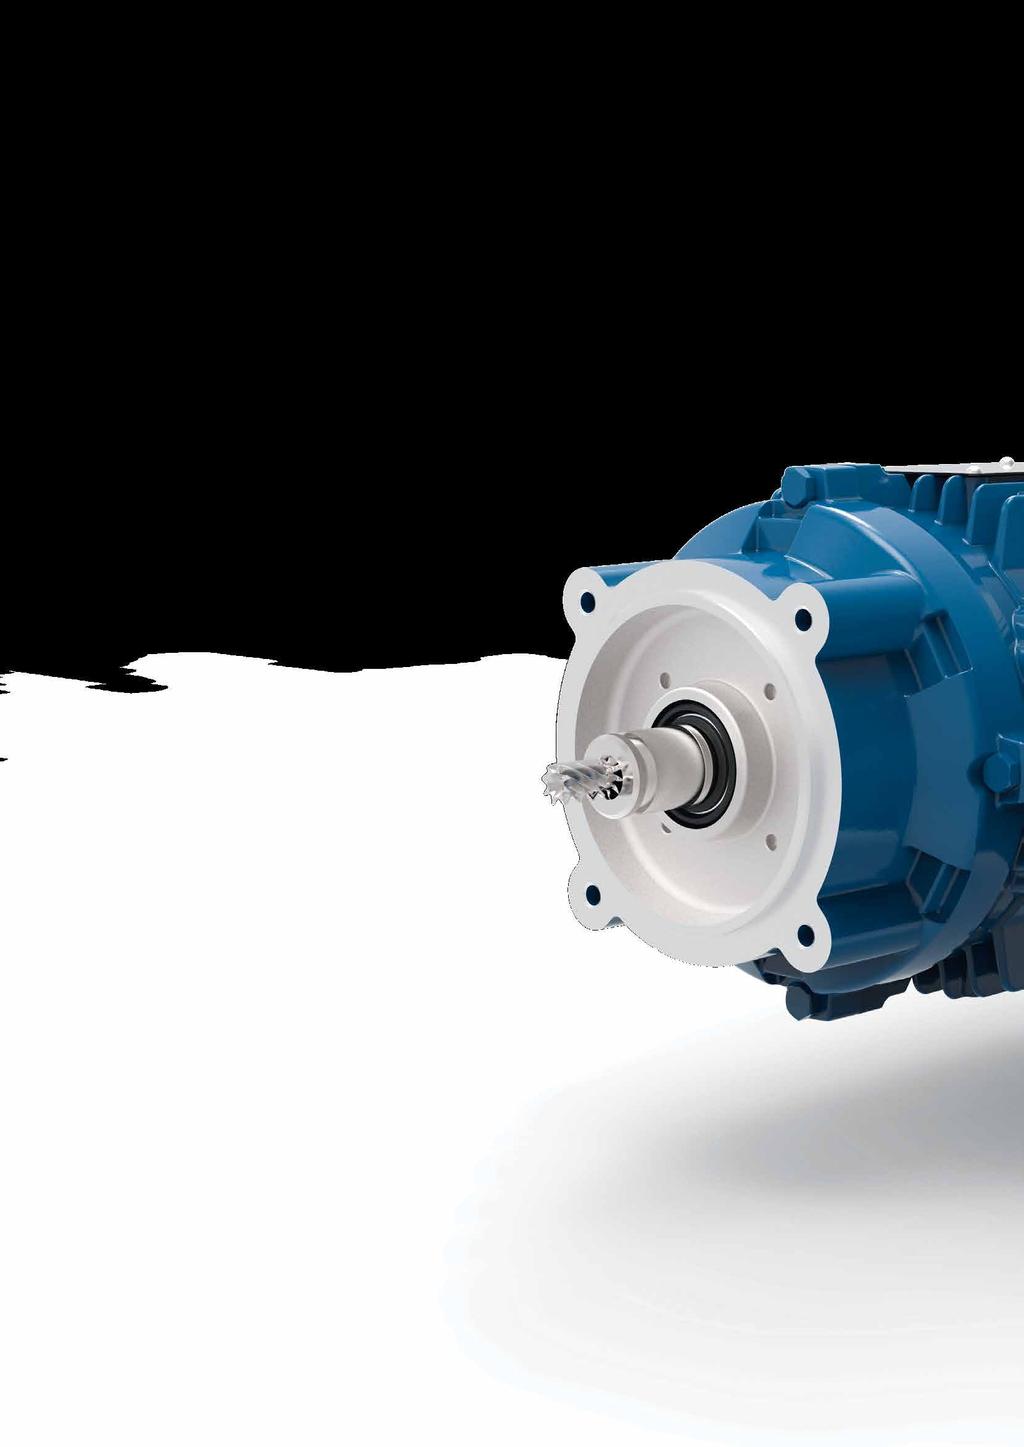 www.we.net Modular interal motor The latest eneration of WEG aluminium motors excels due to the user-friendly desin to efficiency class IE3 and the reliable quality in various industrial sectors.